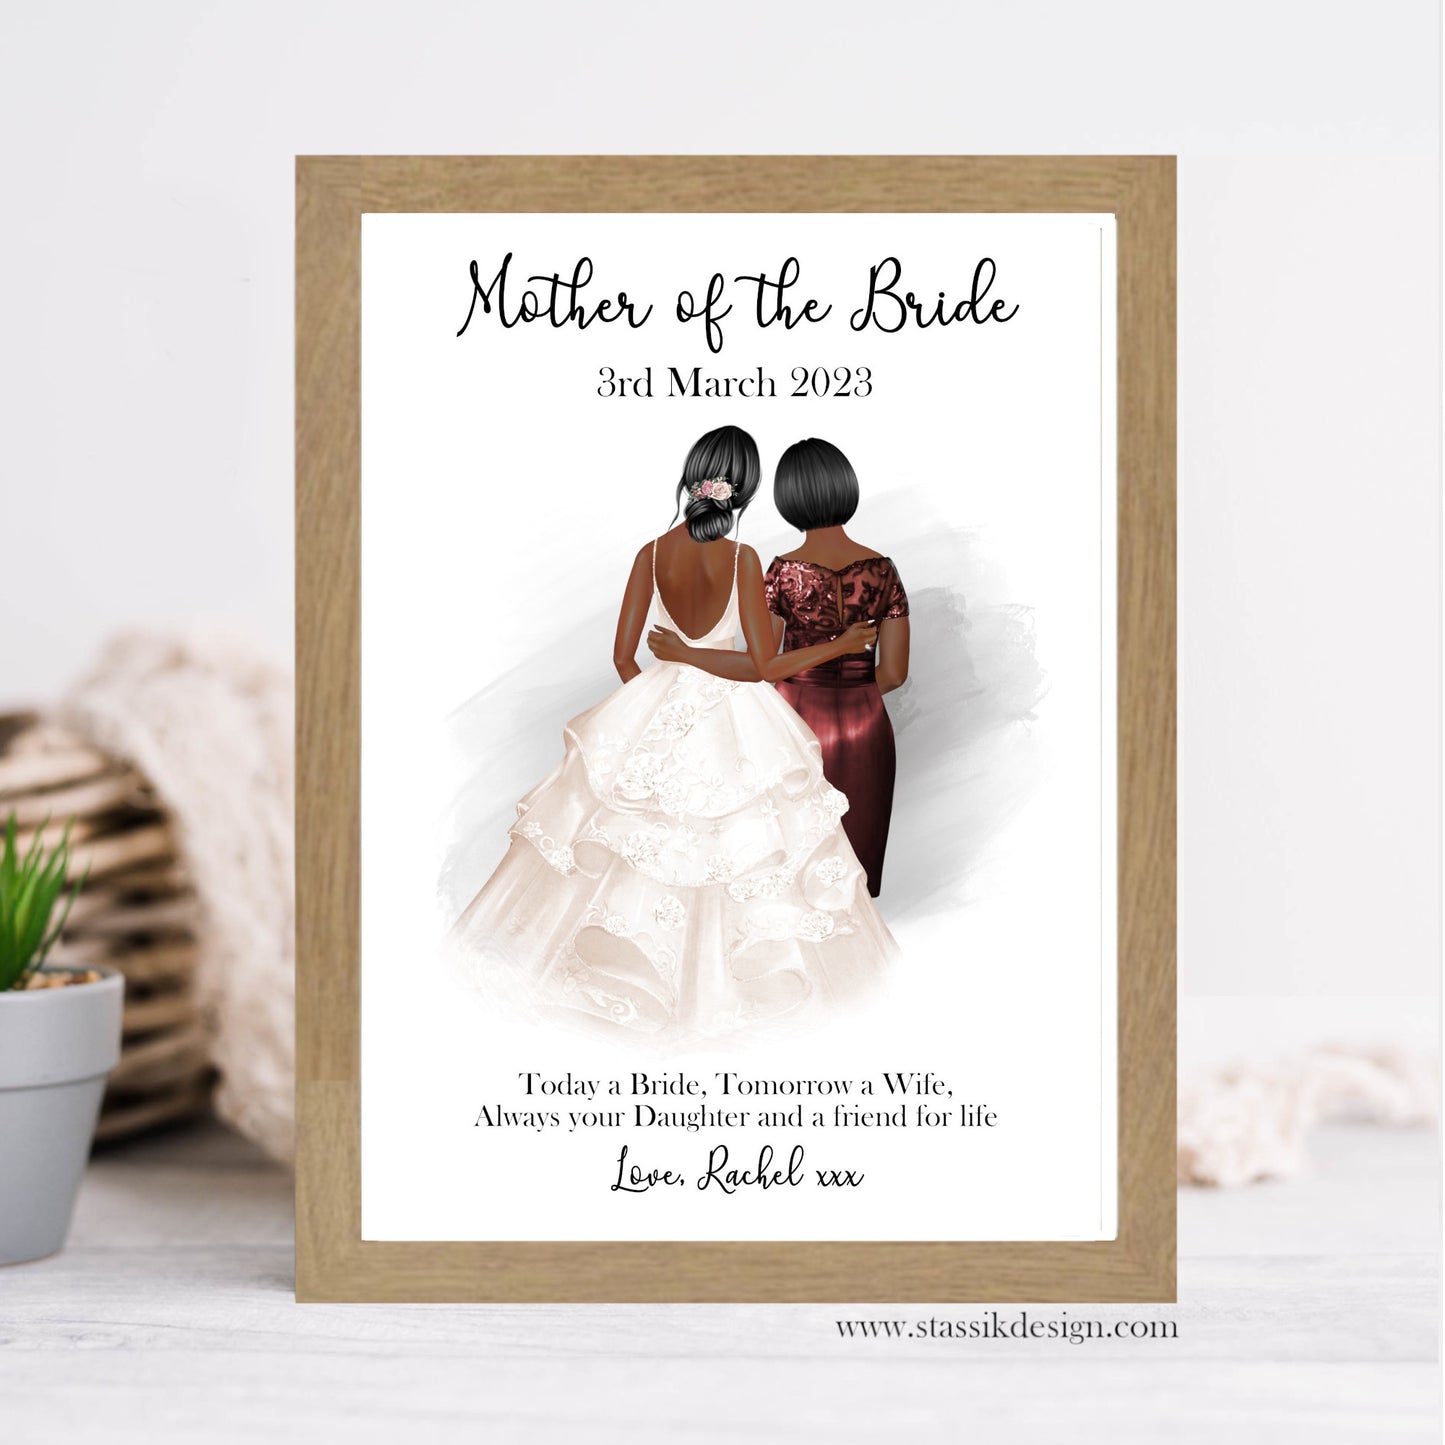 Mother of the Bride Illustration Print